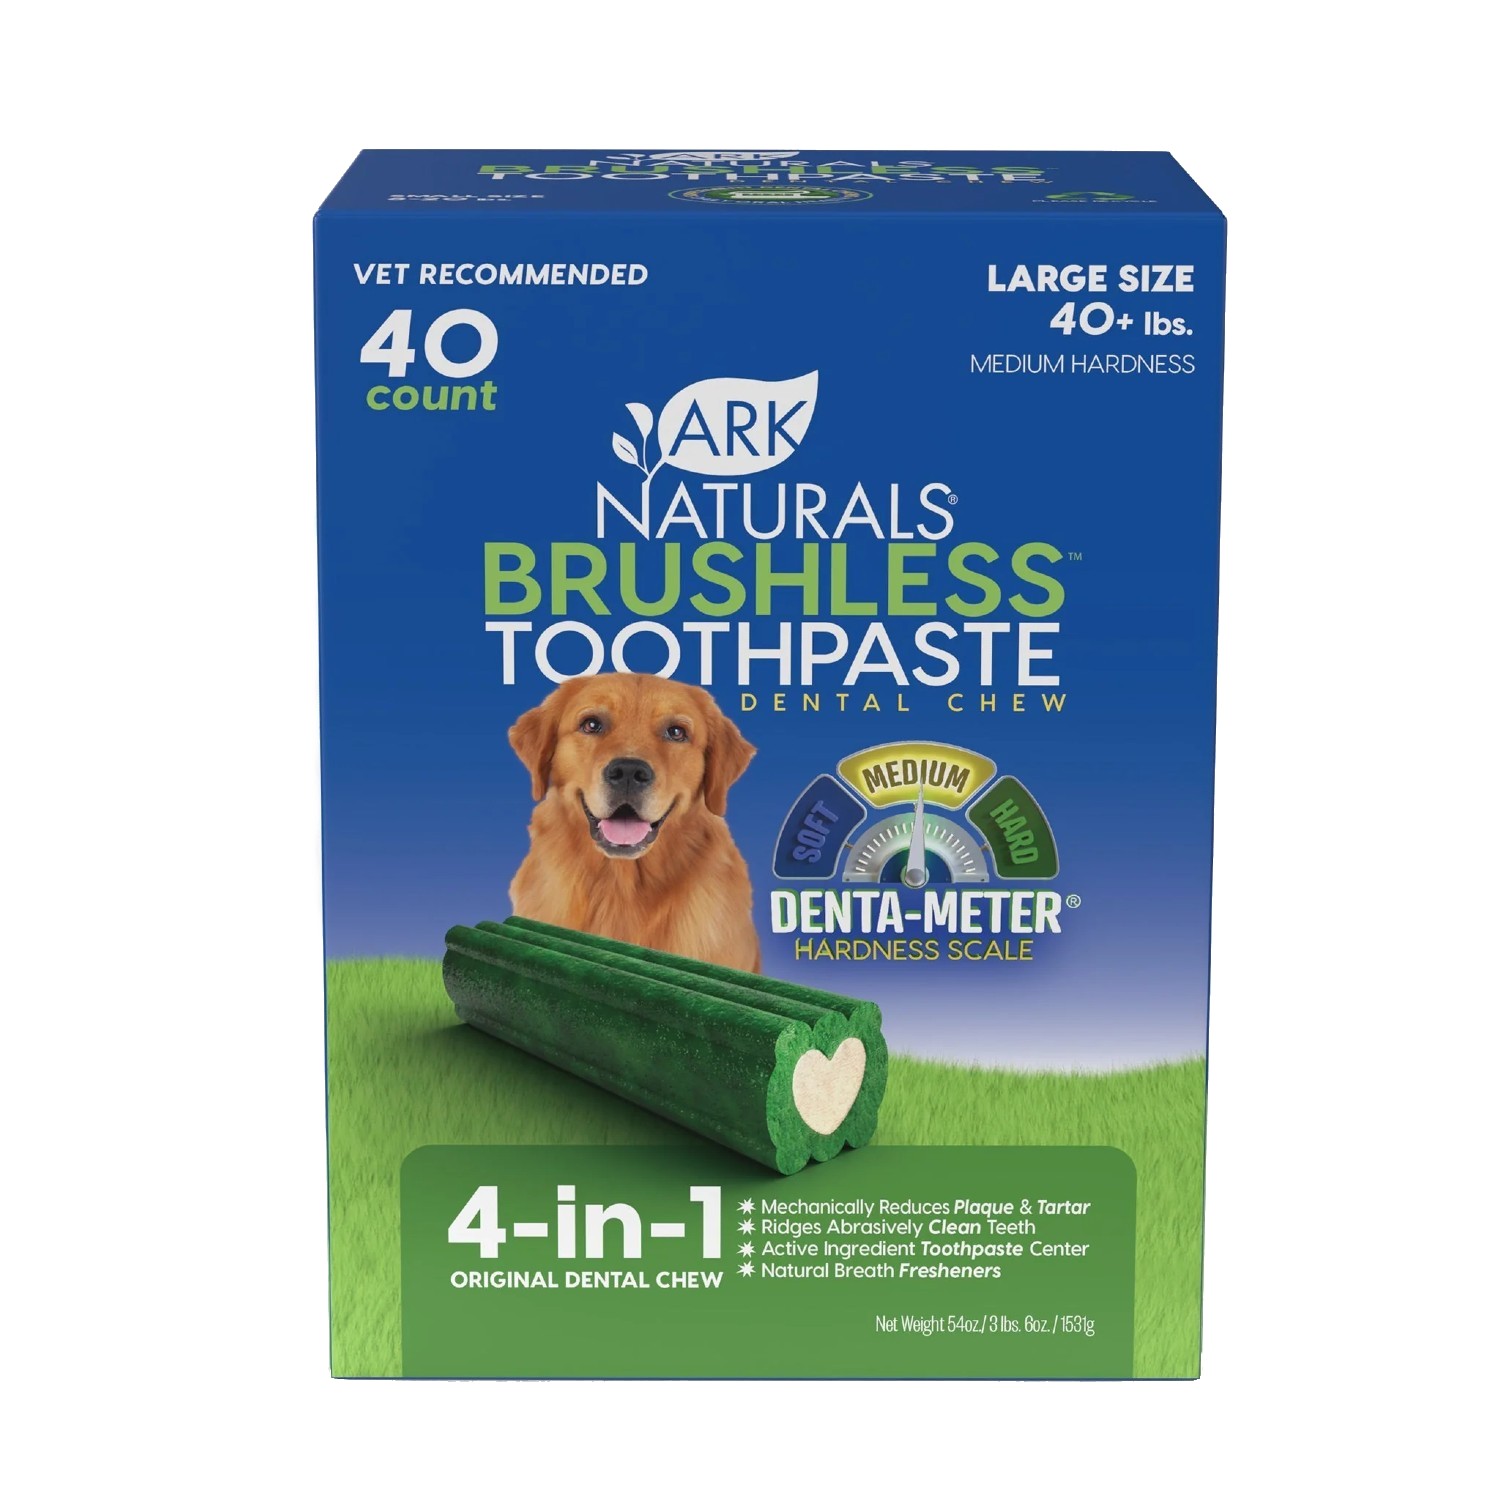 Ark Naturals Brushless Toothpaste Dog Chews - Value Pack